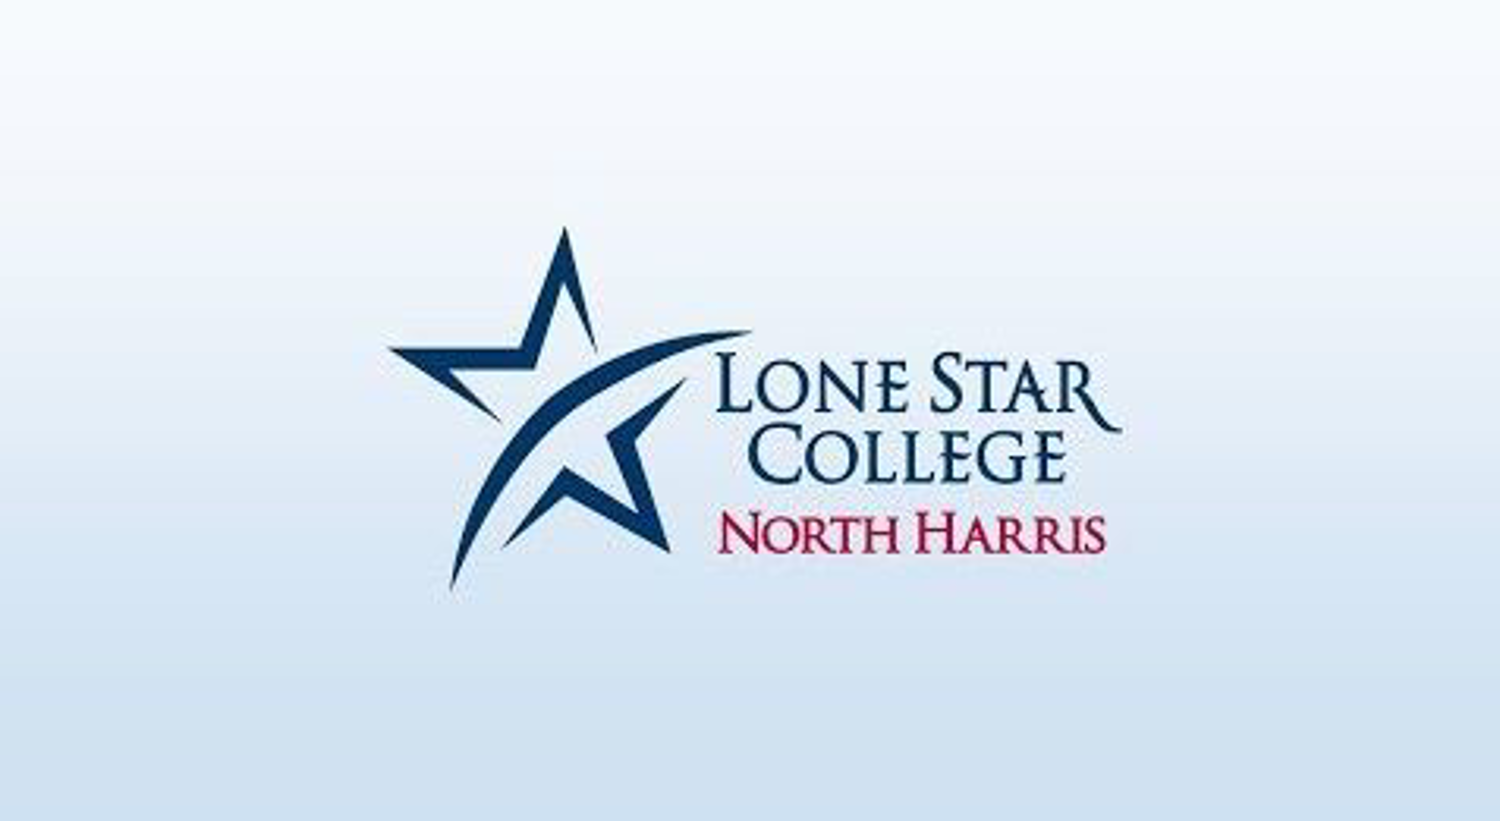 Students can win with fall registration at Lone Star CollegeNorth Harris